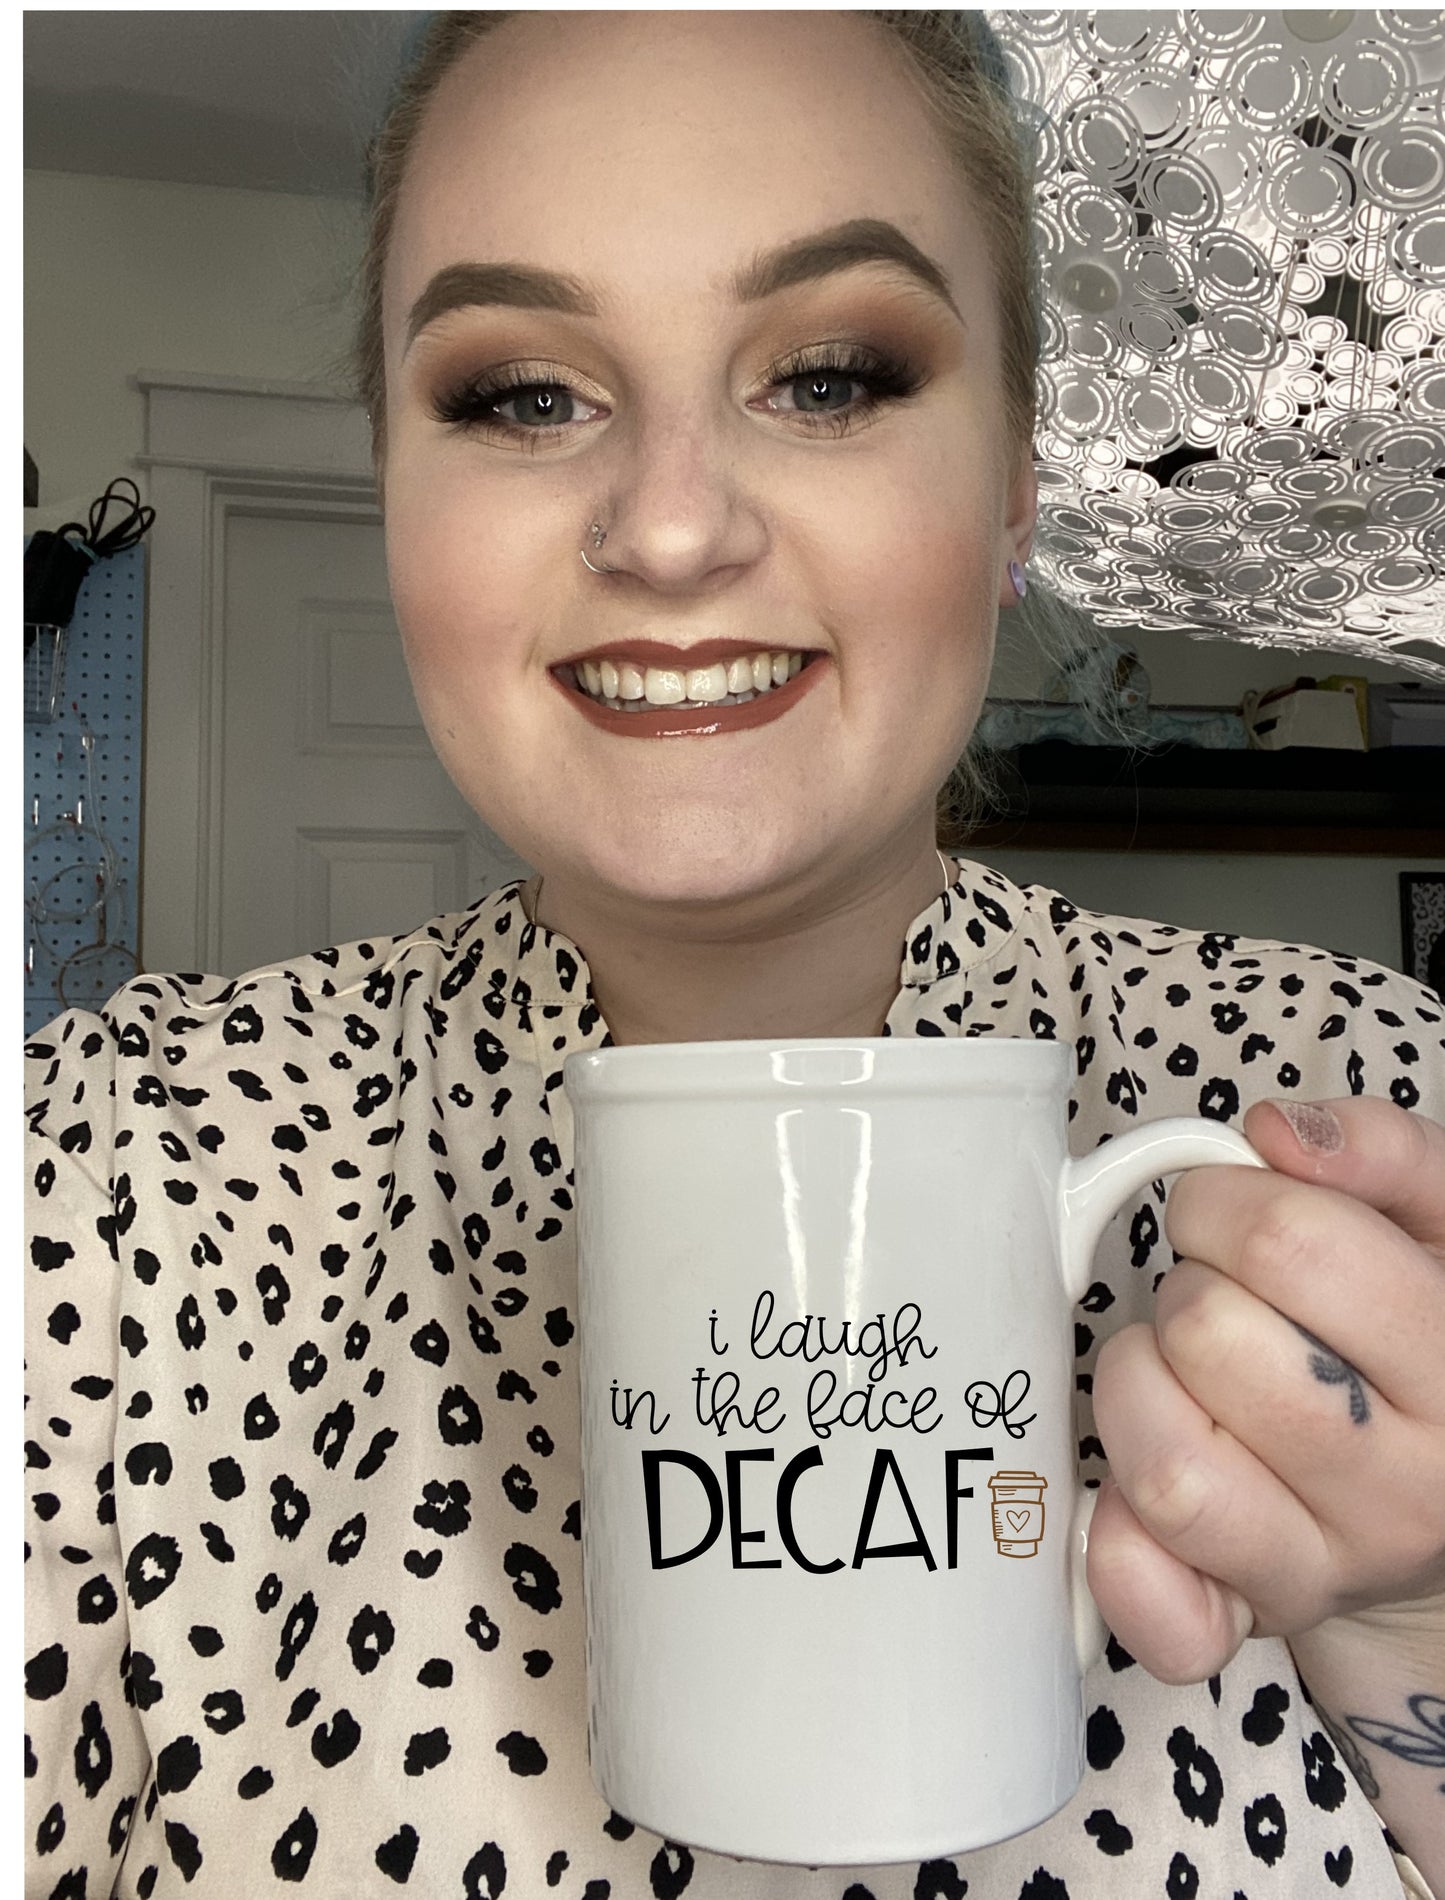 Cute "I laugh in the face of decaf" mug